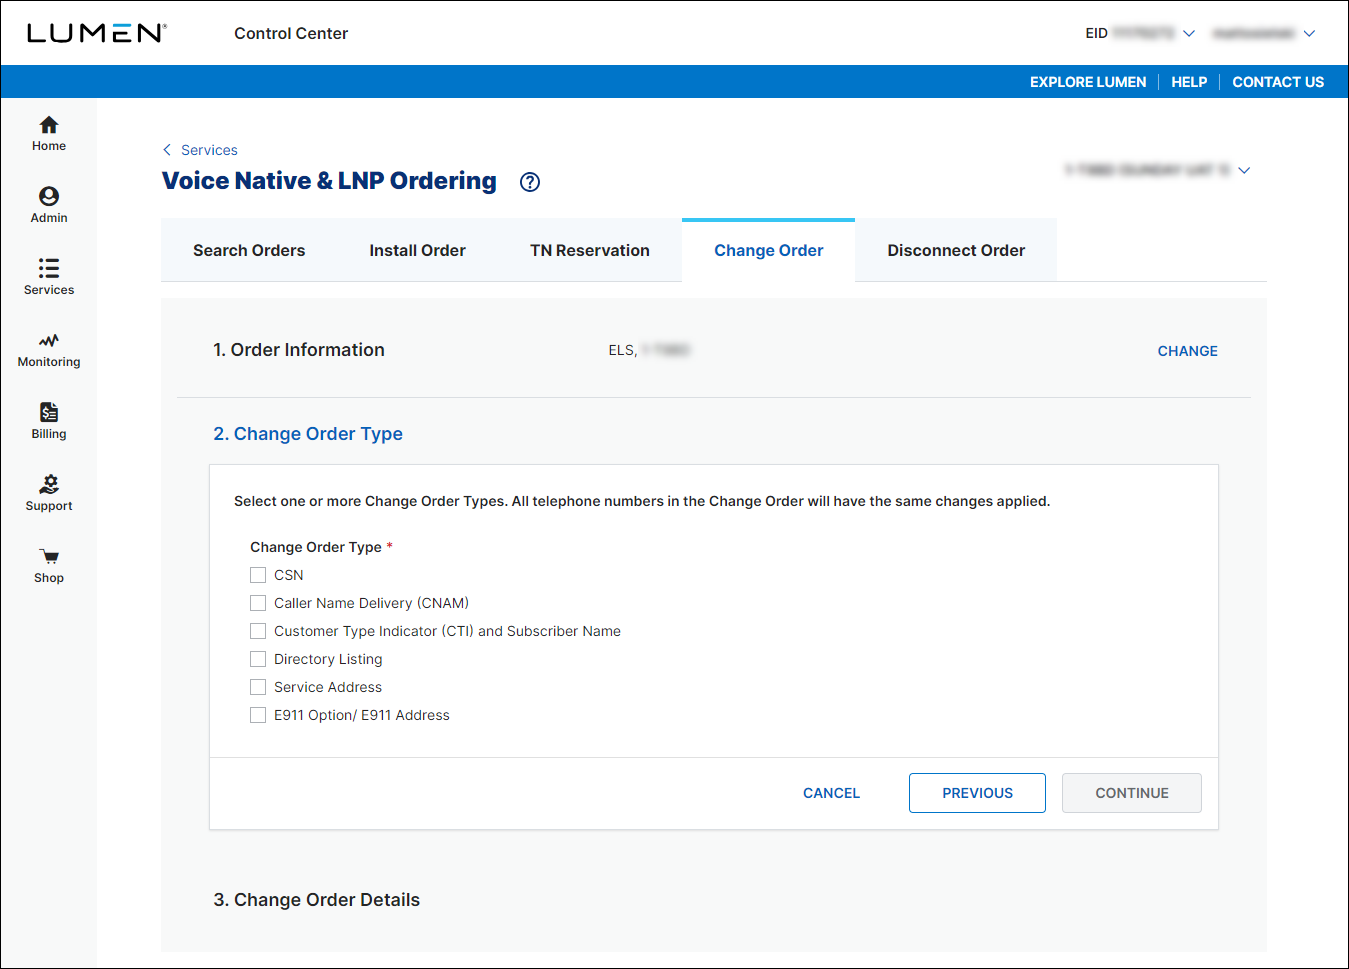 Voice Native & LNP Ordering (showing Change Order tab and Change Order Type section for ELS)